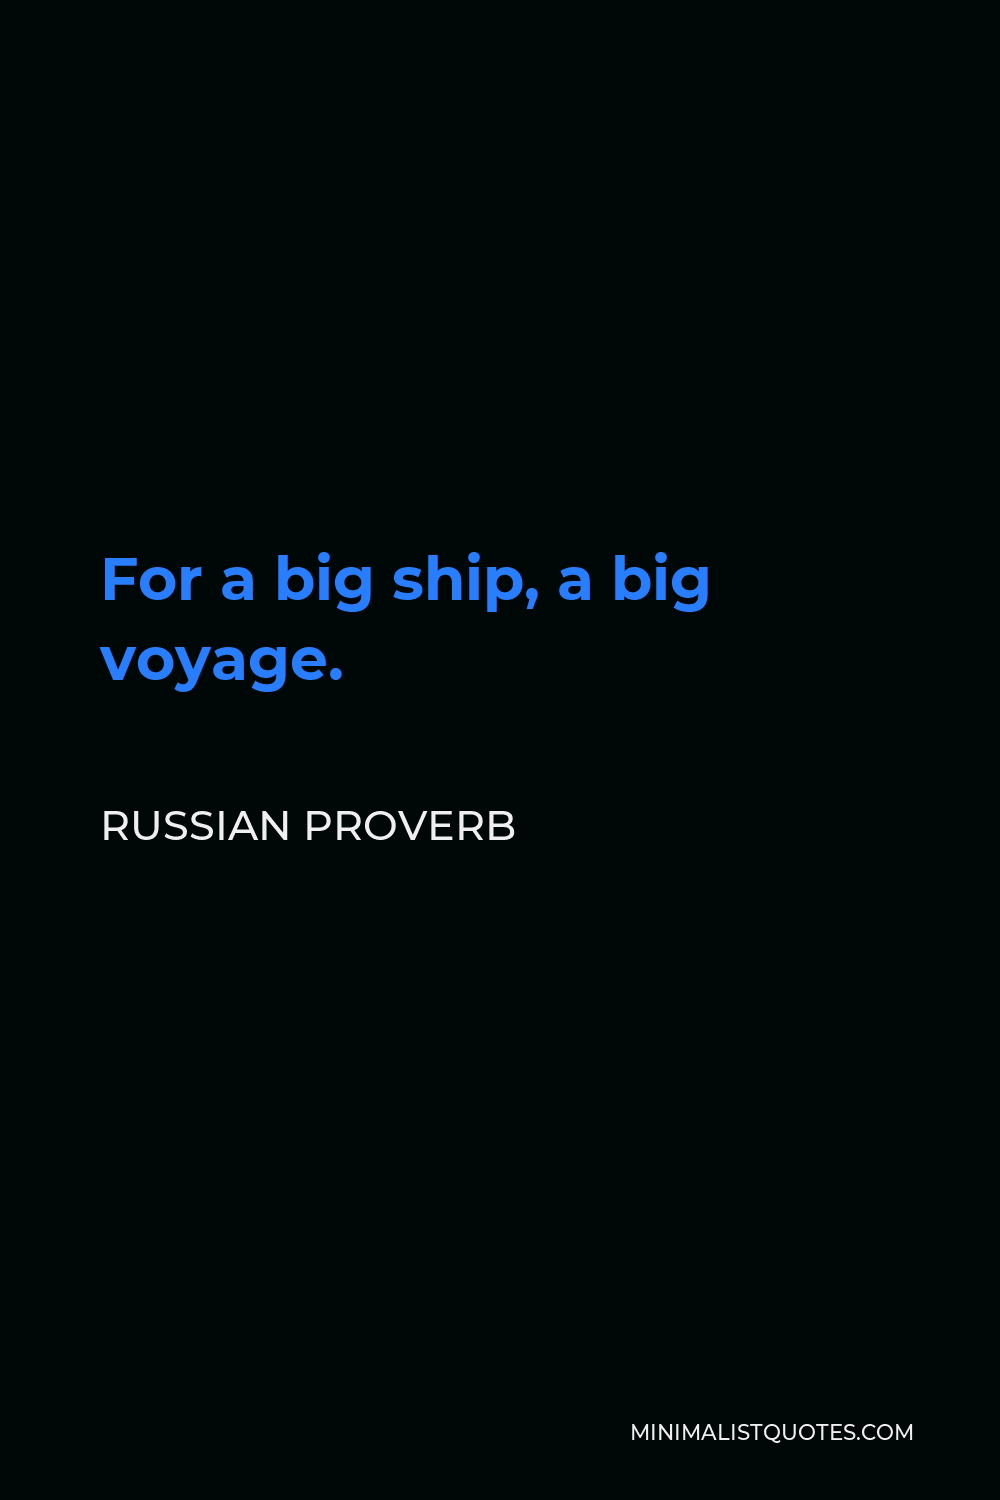 Russian Proverb Quote - For a big ship, a big voyage.